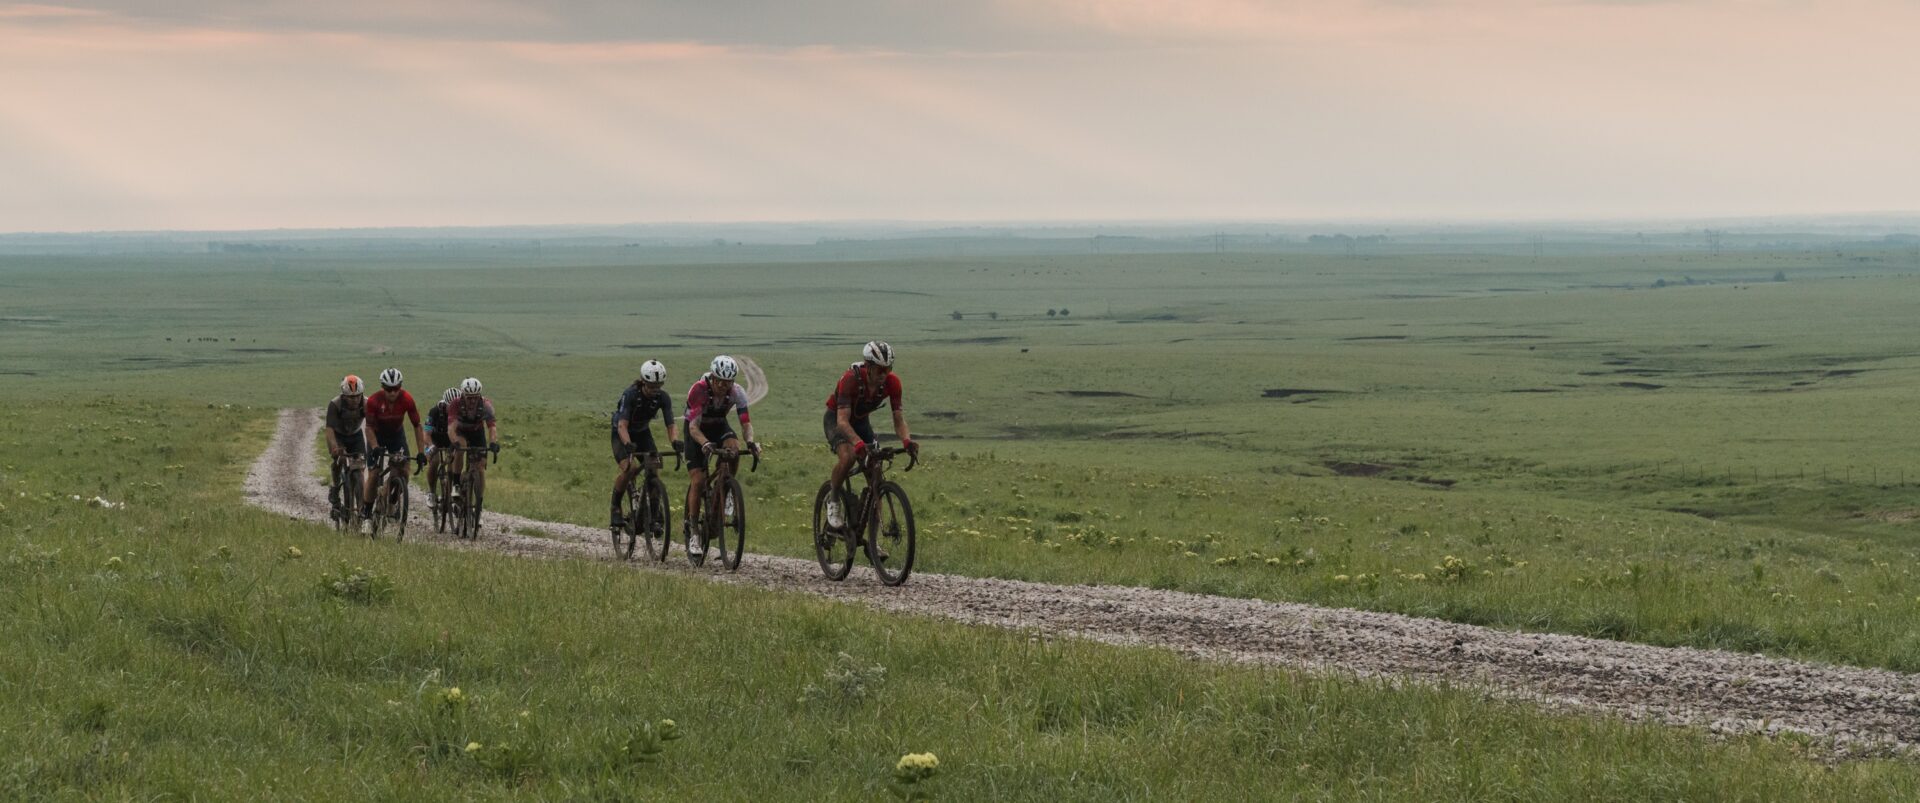 Pack of riders in the Kansas hills